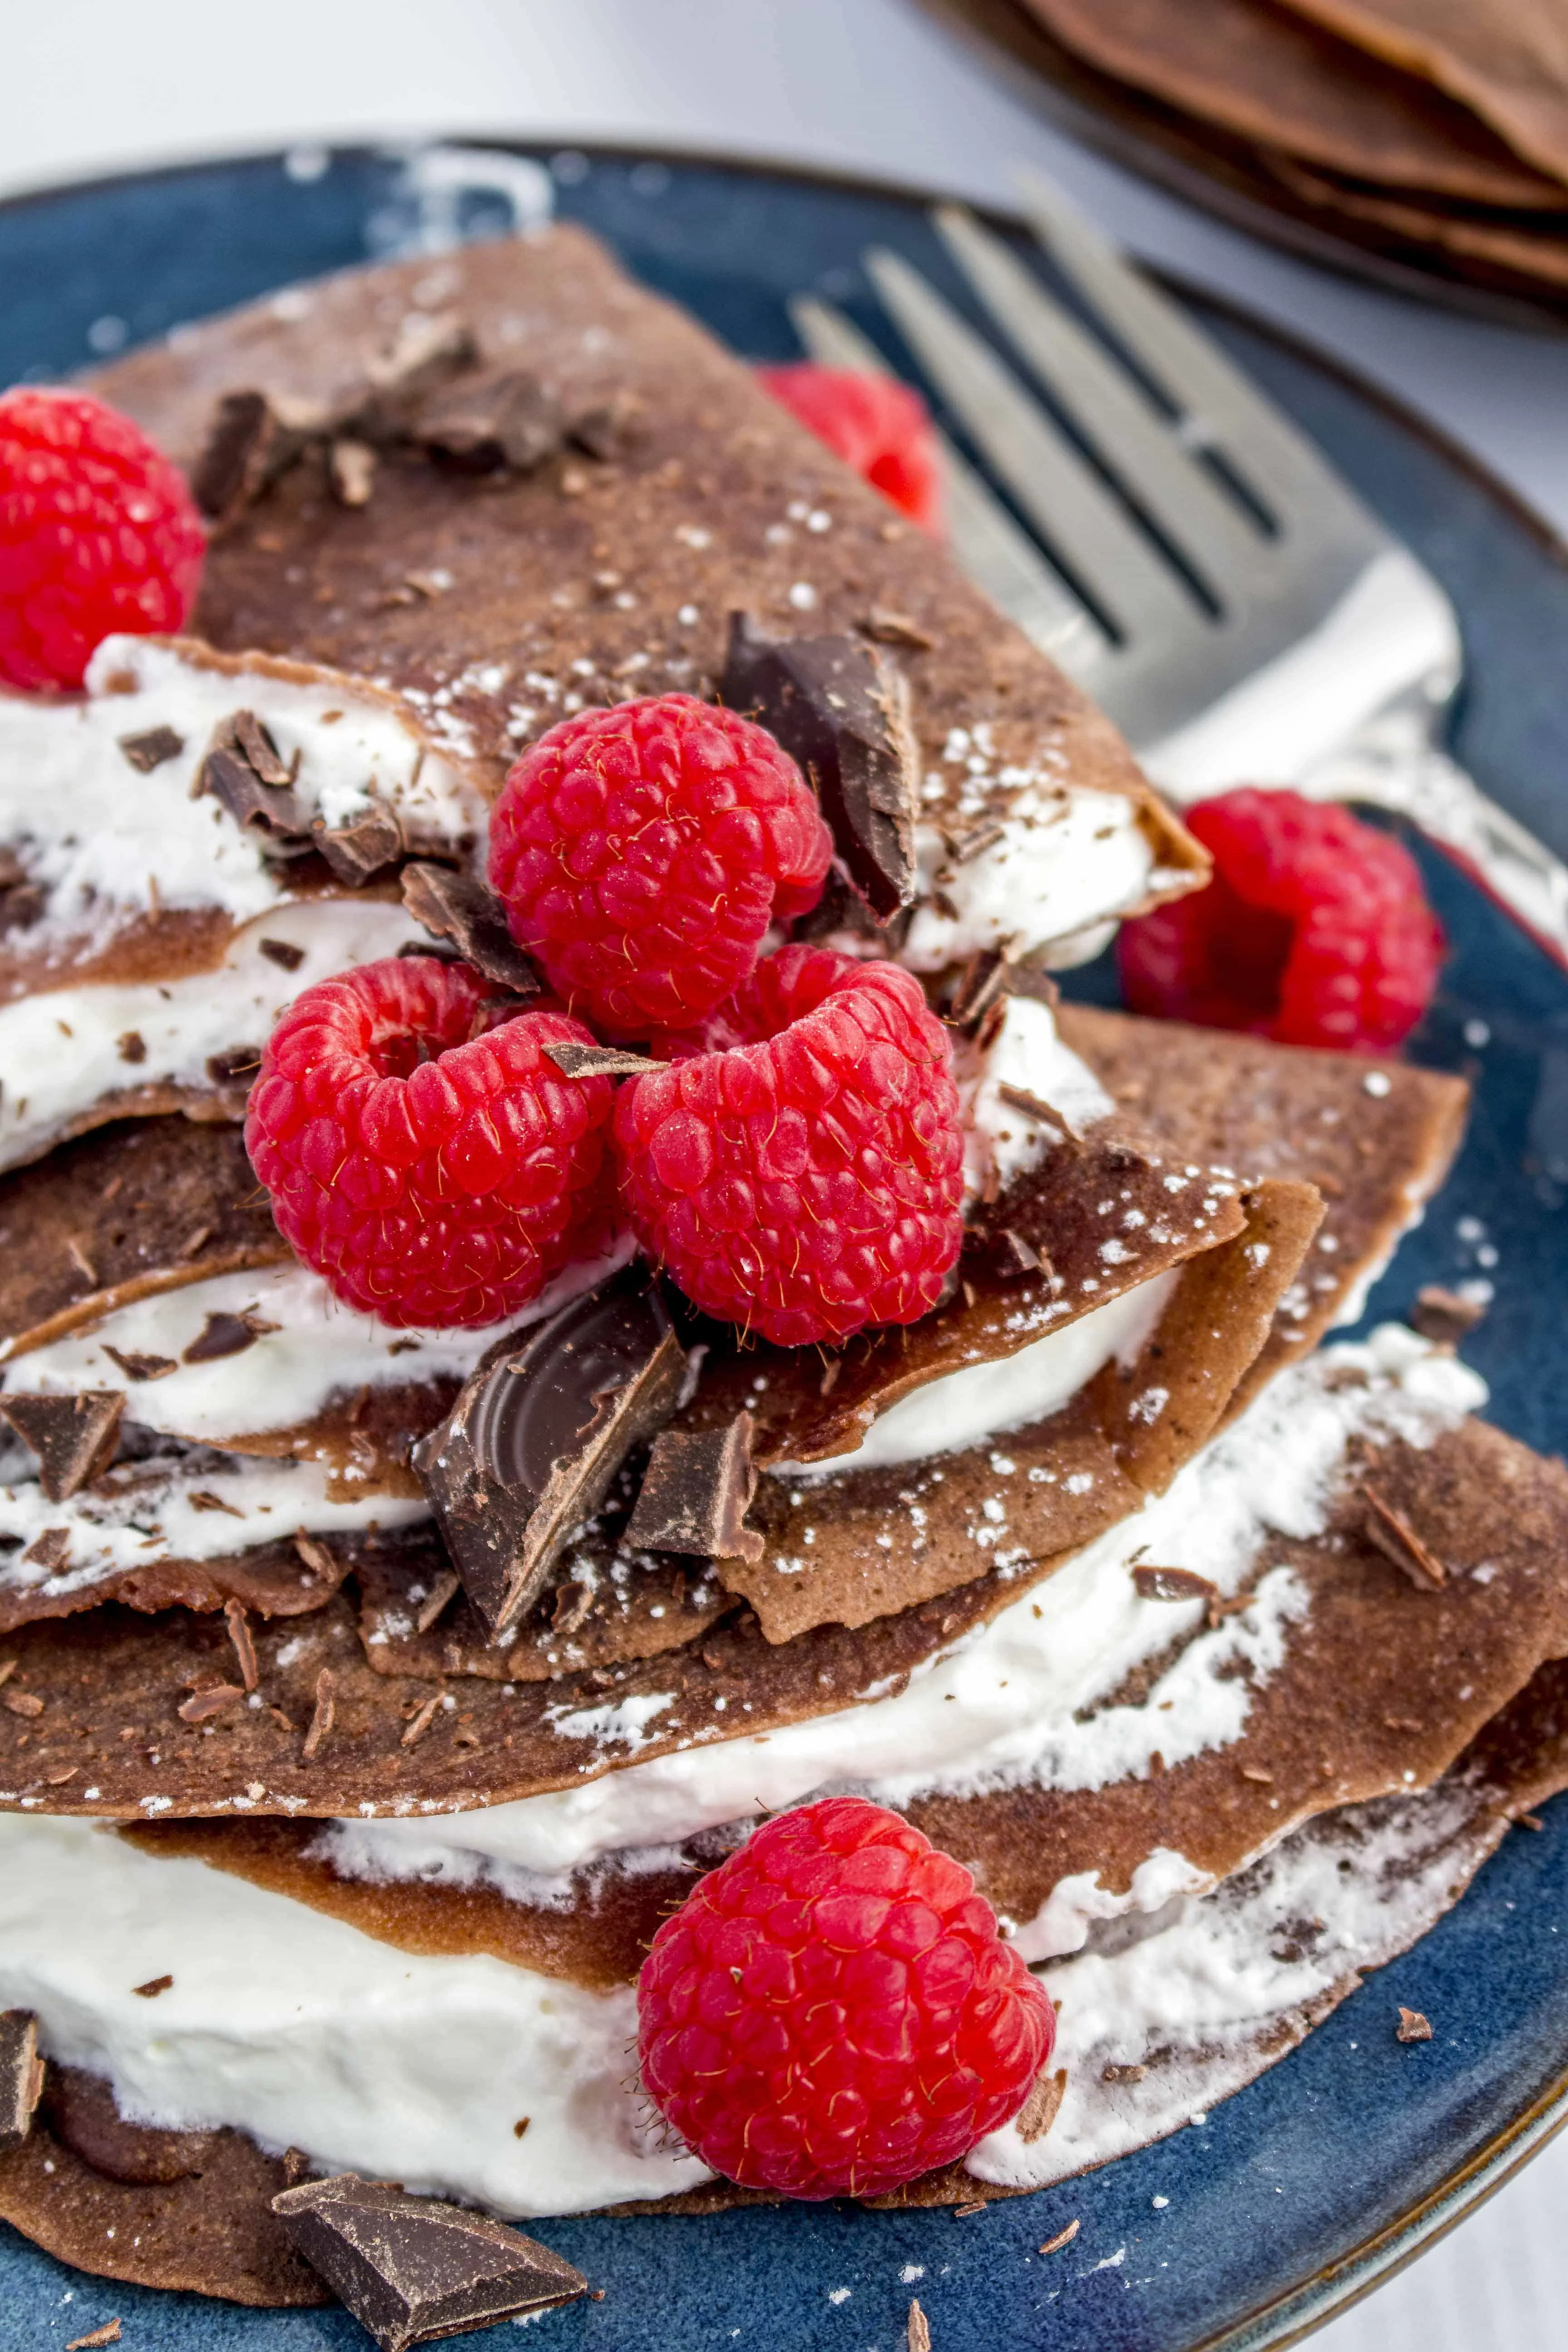 Chocolate Gluten Free Crepes